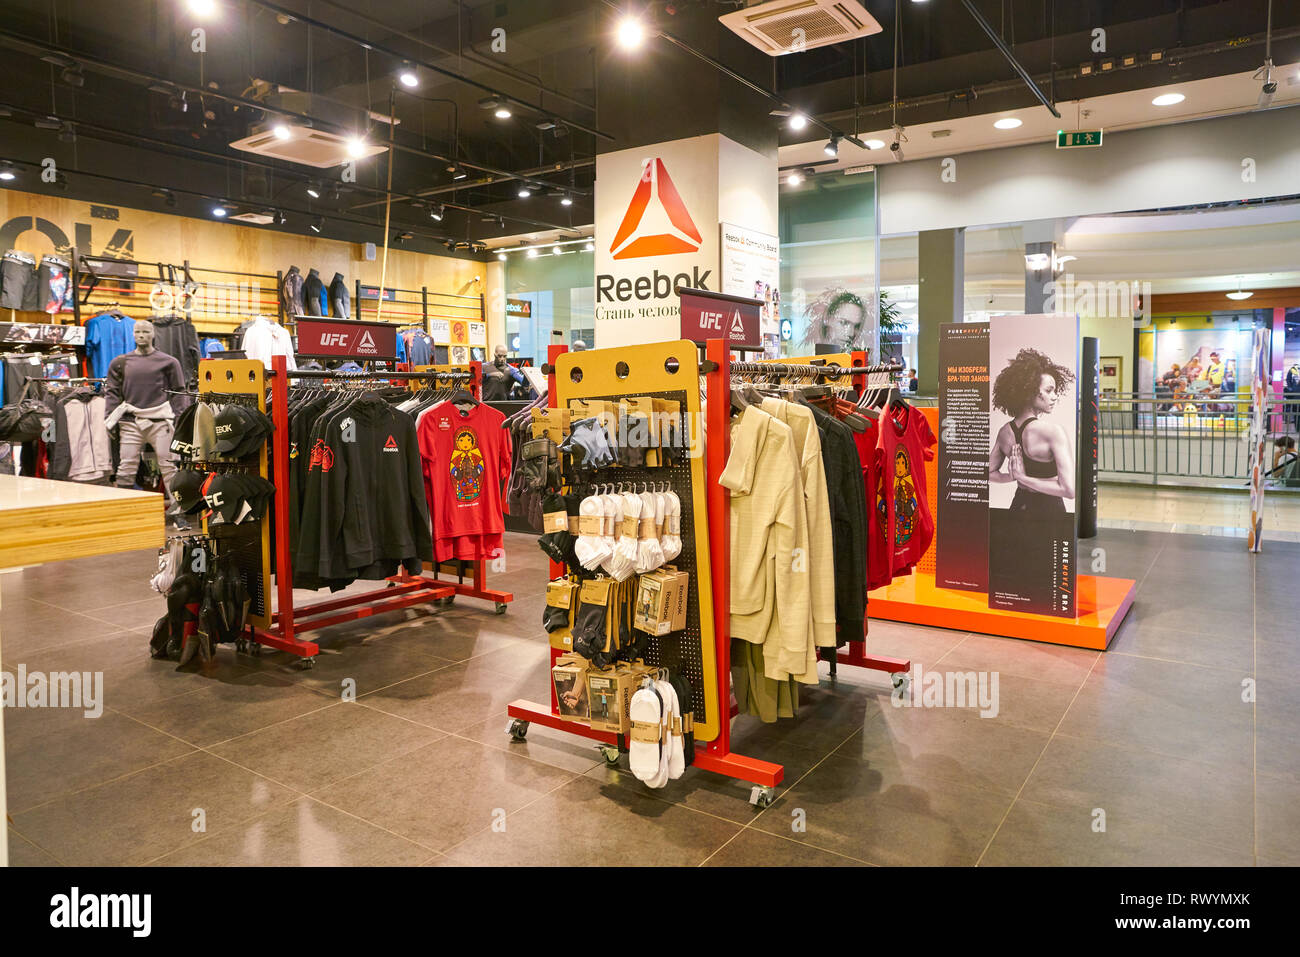 MOSCOW, RUSSIA - CIRCA SEPTEMBER, 2018: interior shot of Reebok shop in  Moscow Stock Photo - Alamy